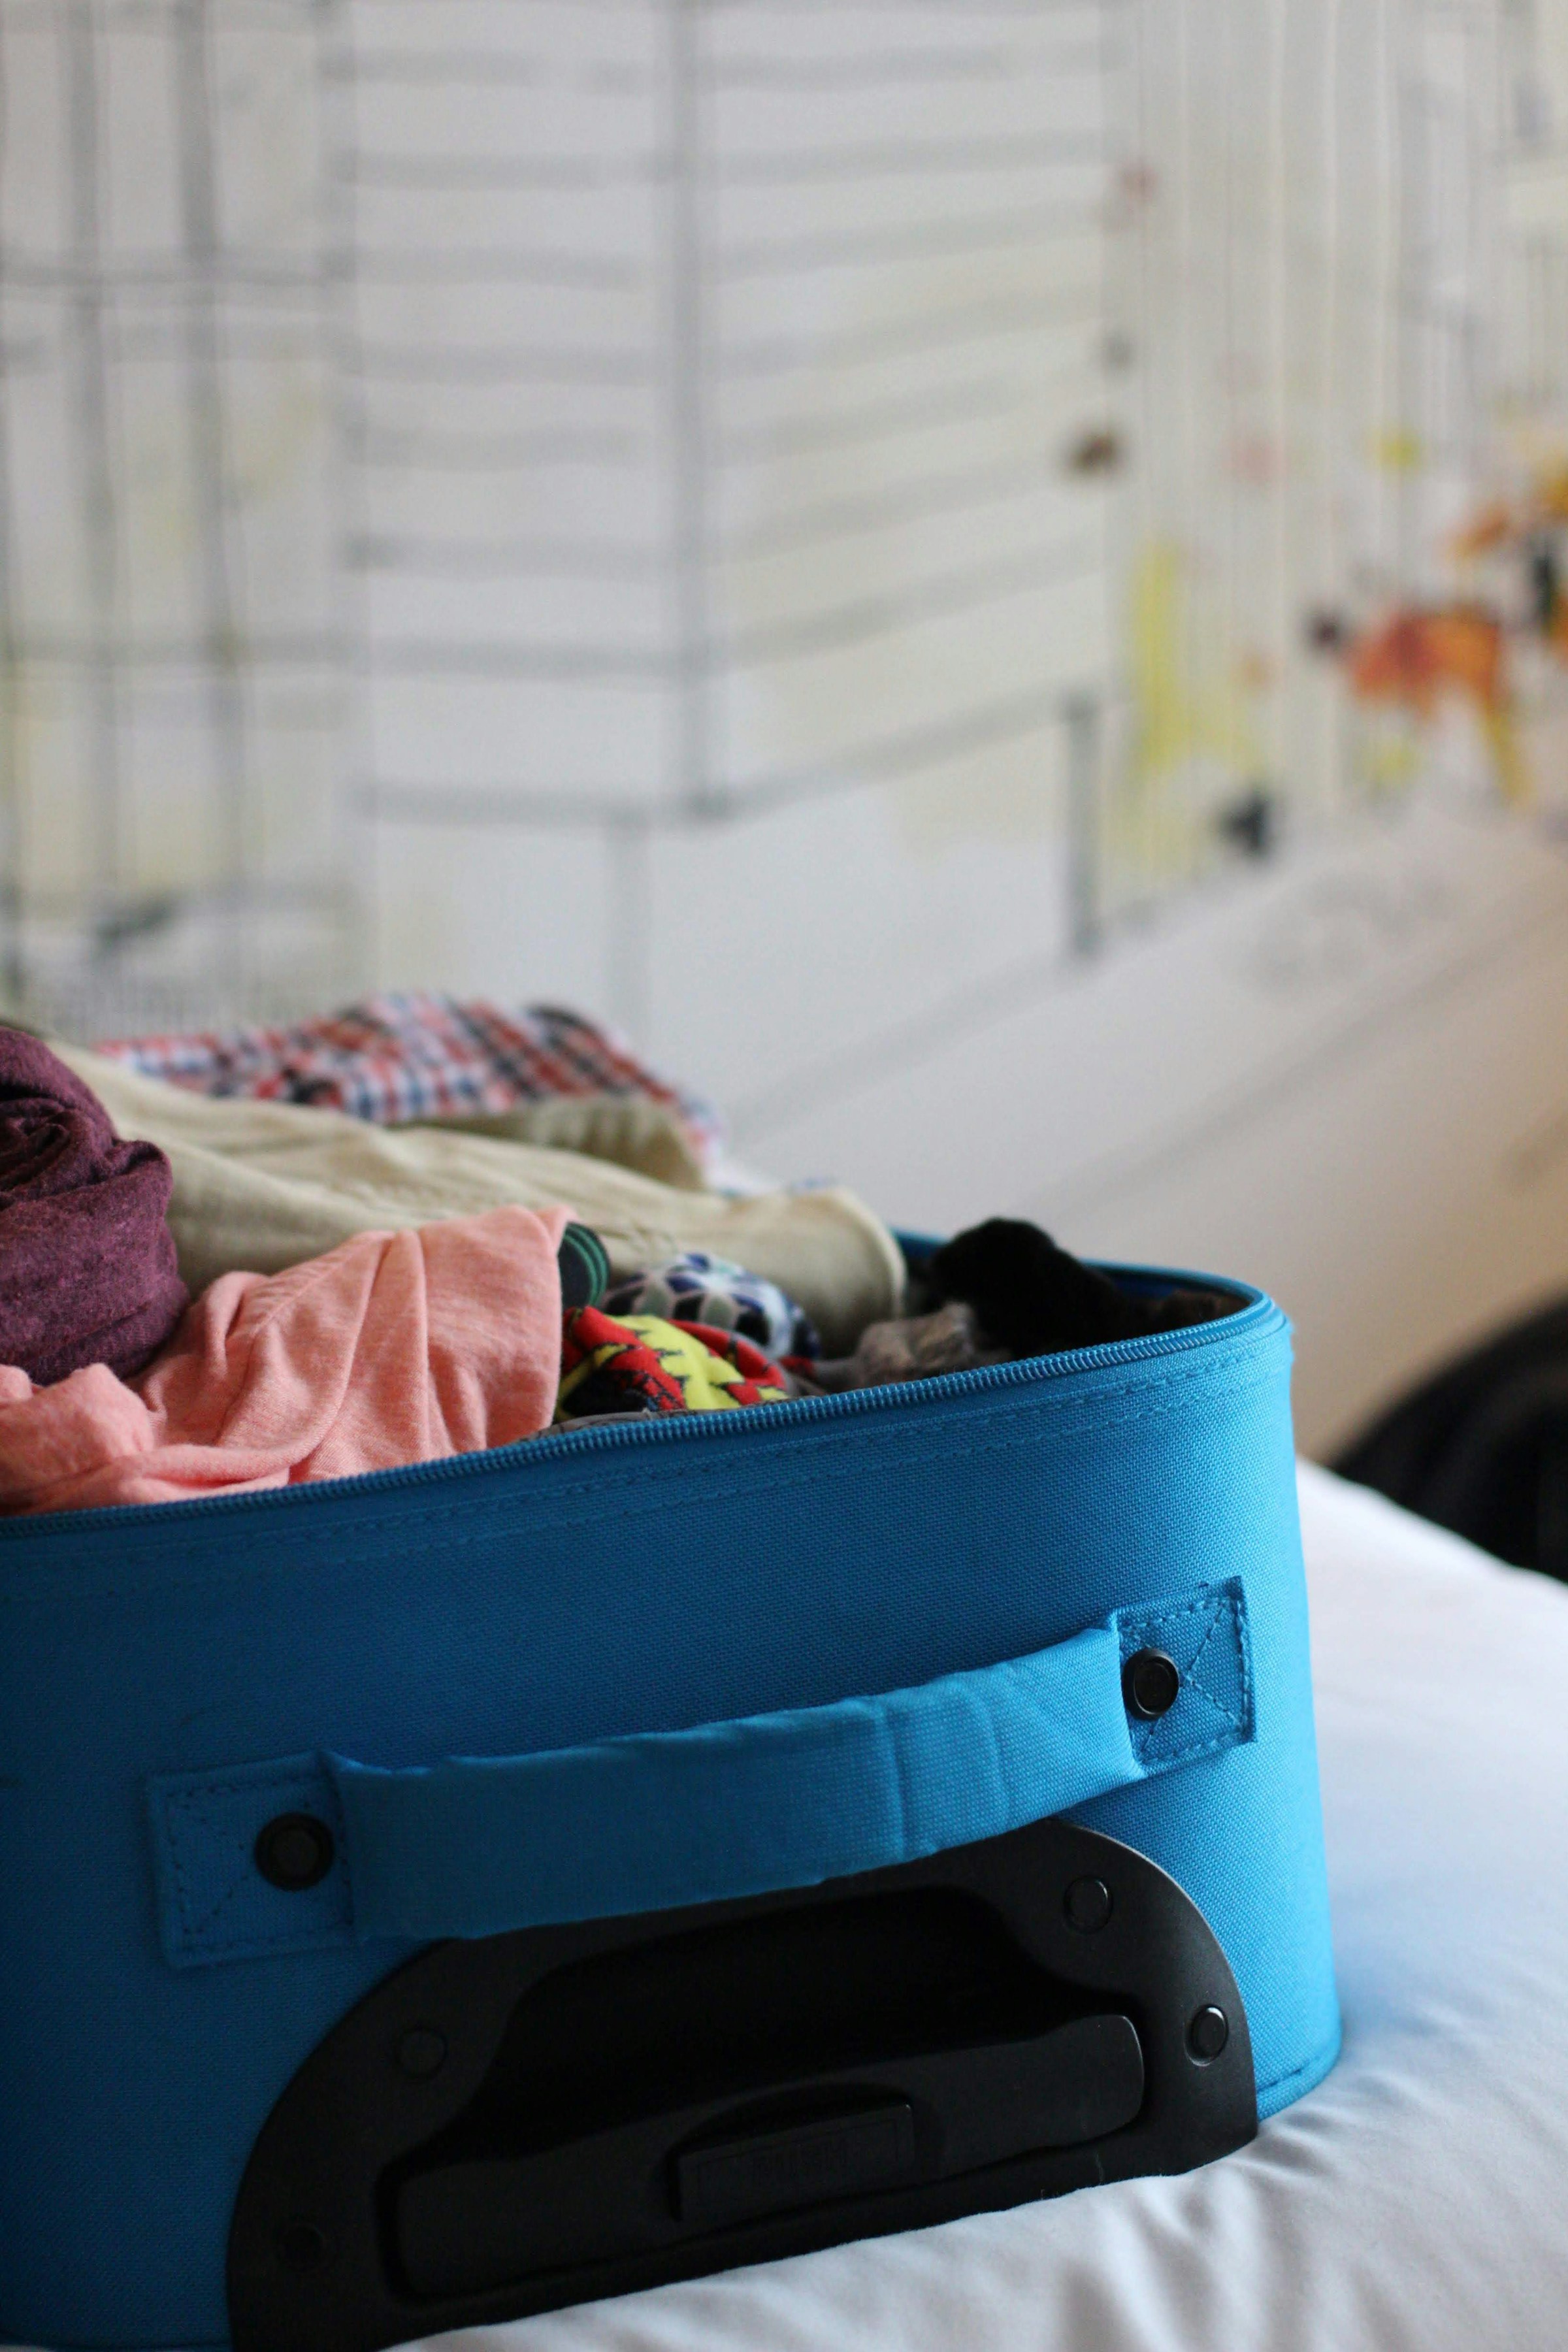 A suitcase stashed with clothes | Source: Unsplash